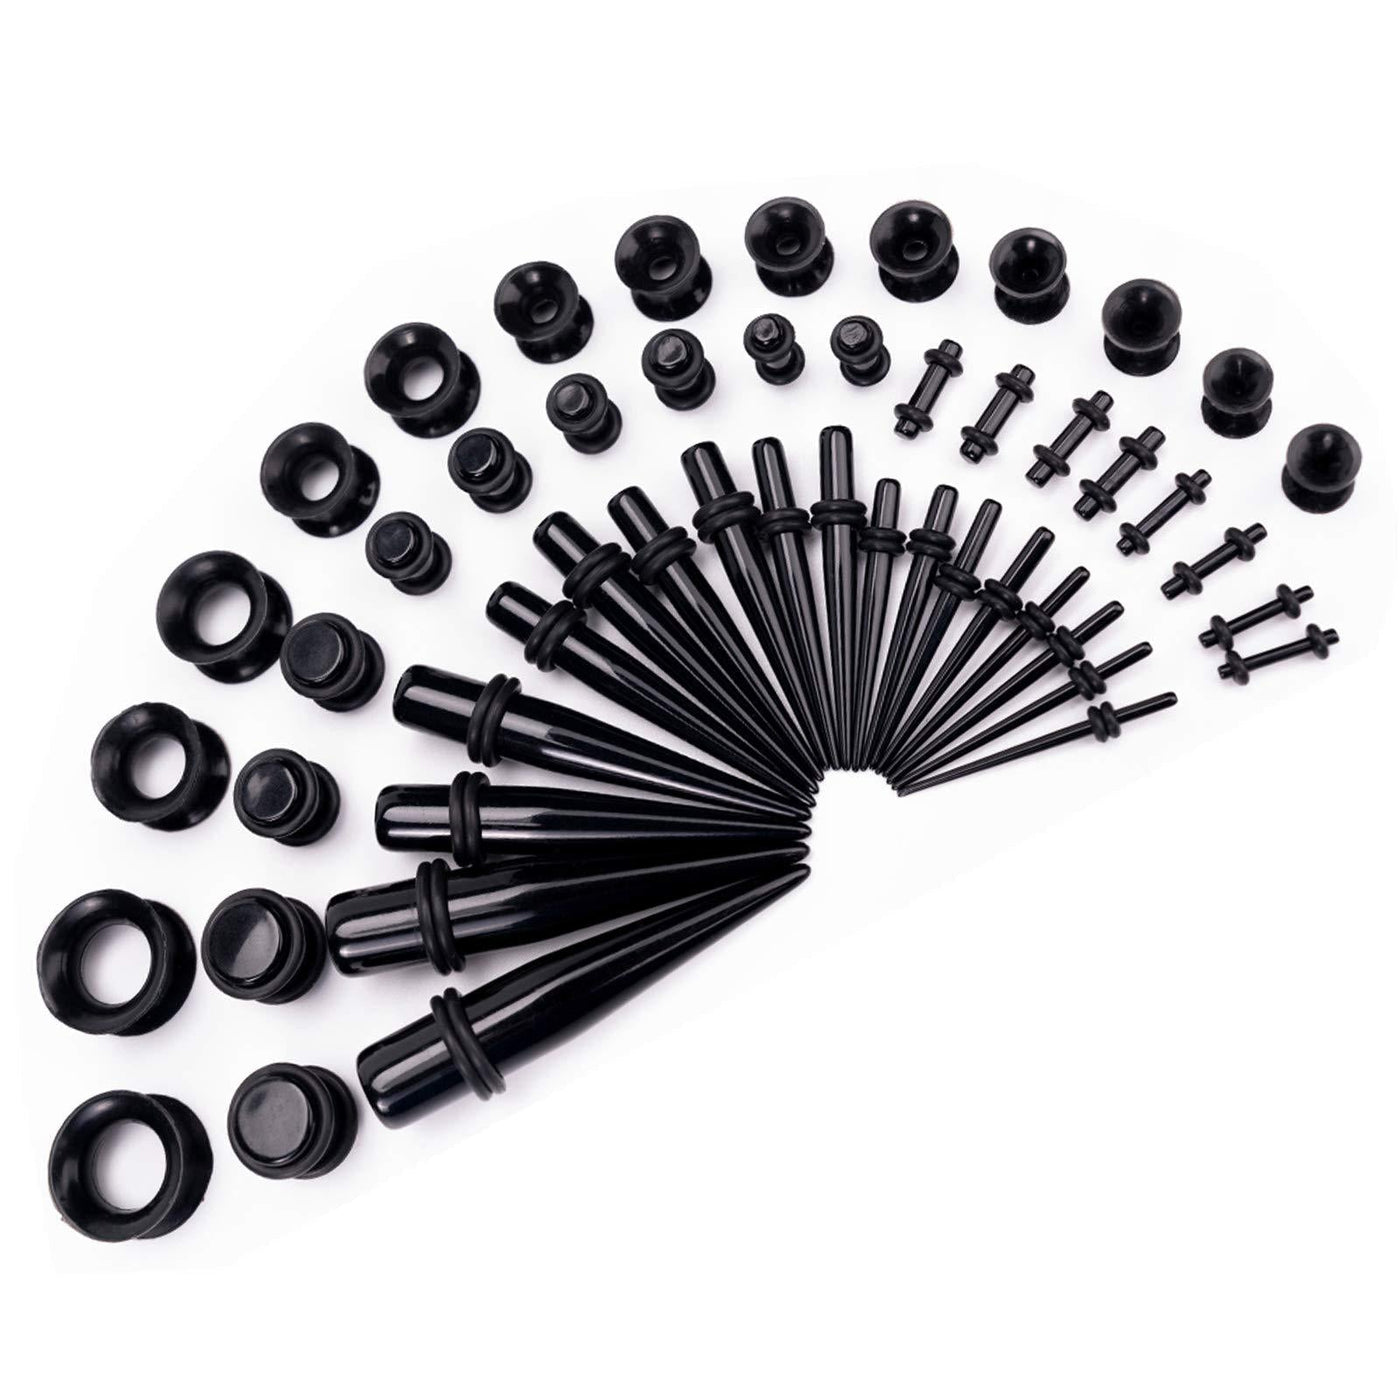 LLGLTEC Ear Stretching Kit 50 Pieces 14G-00G Ear Gauges Expander Set  Acrylic Tapers and Plugs & Silicone Tunnels Body Piercing Jewelry Set with  EVA Box Black